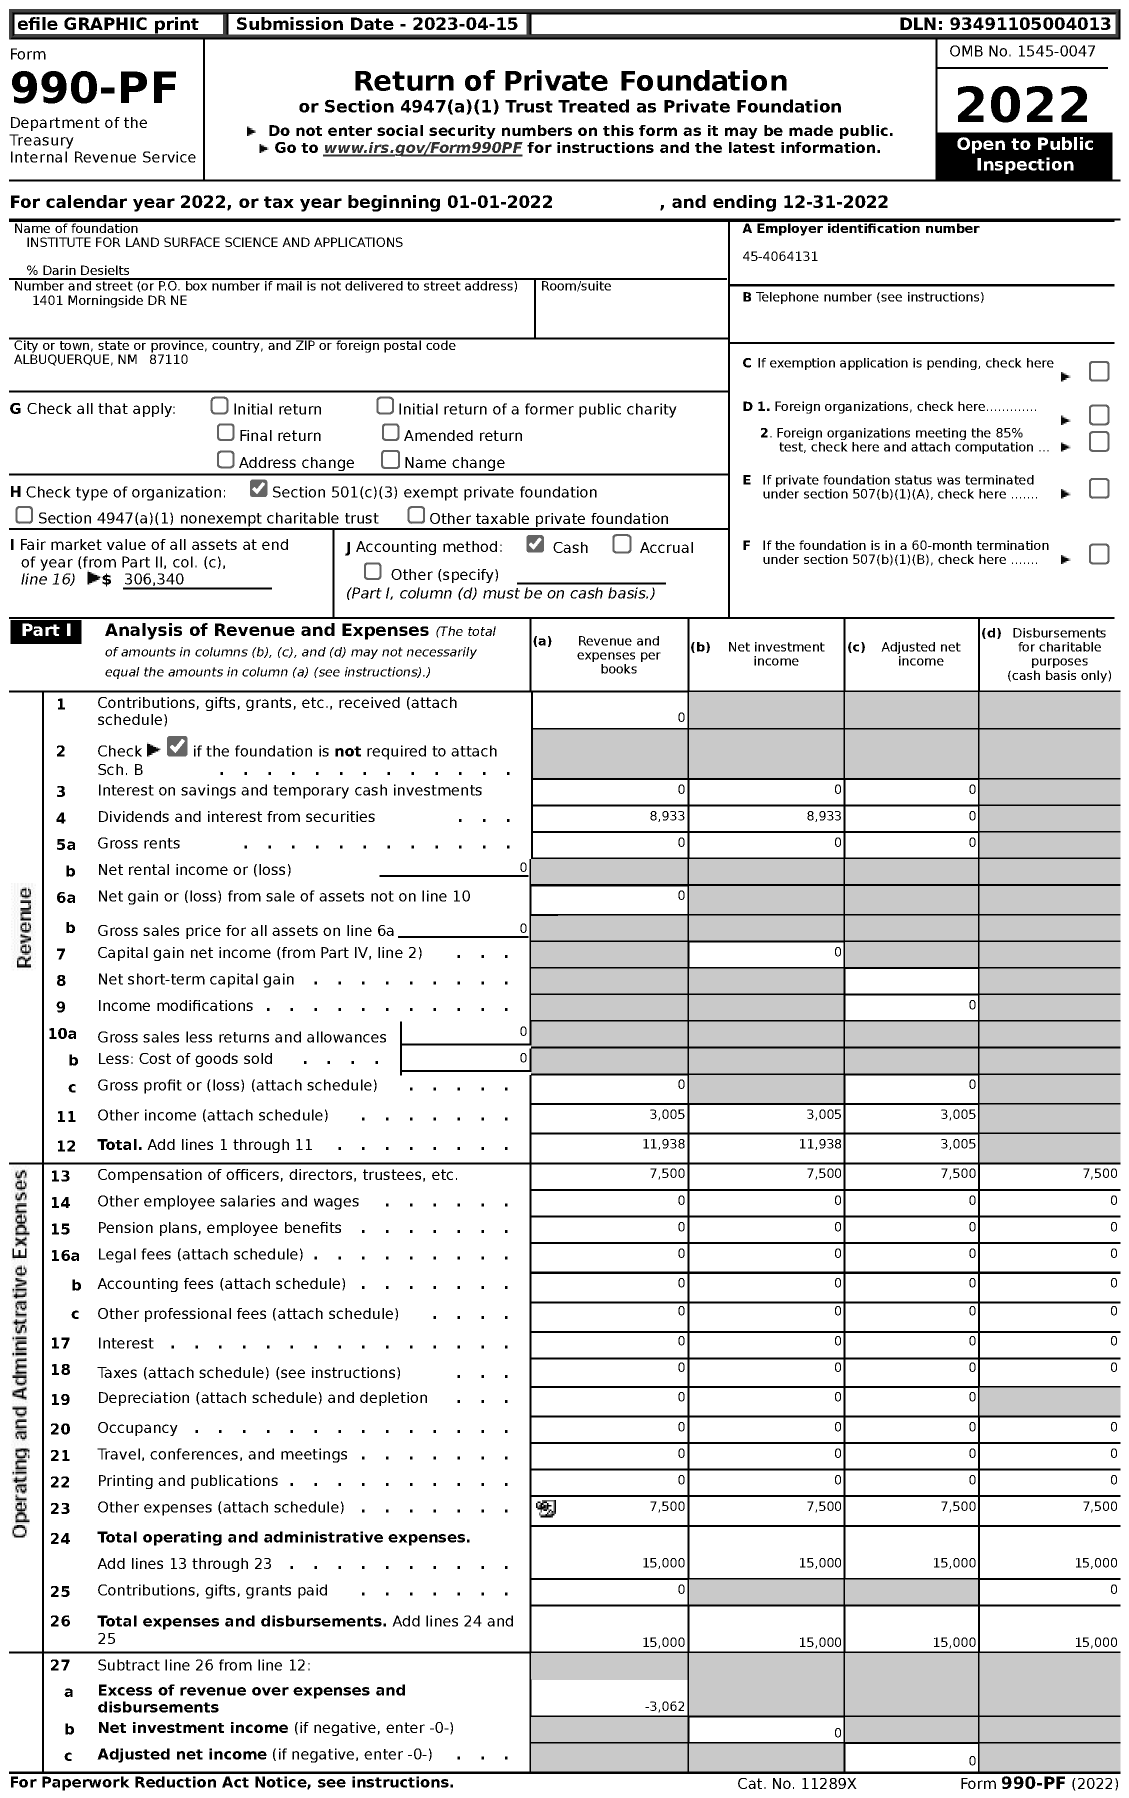 Image of first page of 2022 Form 990PF for Institute for Land Surface Science and Applications